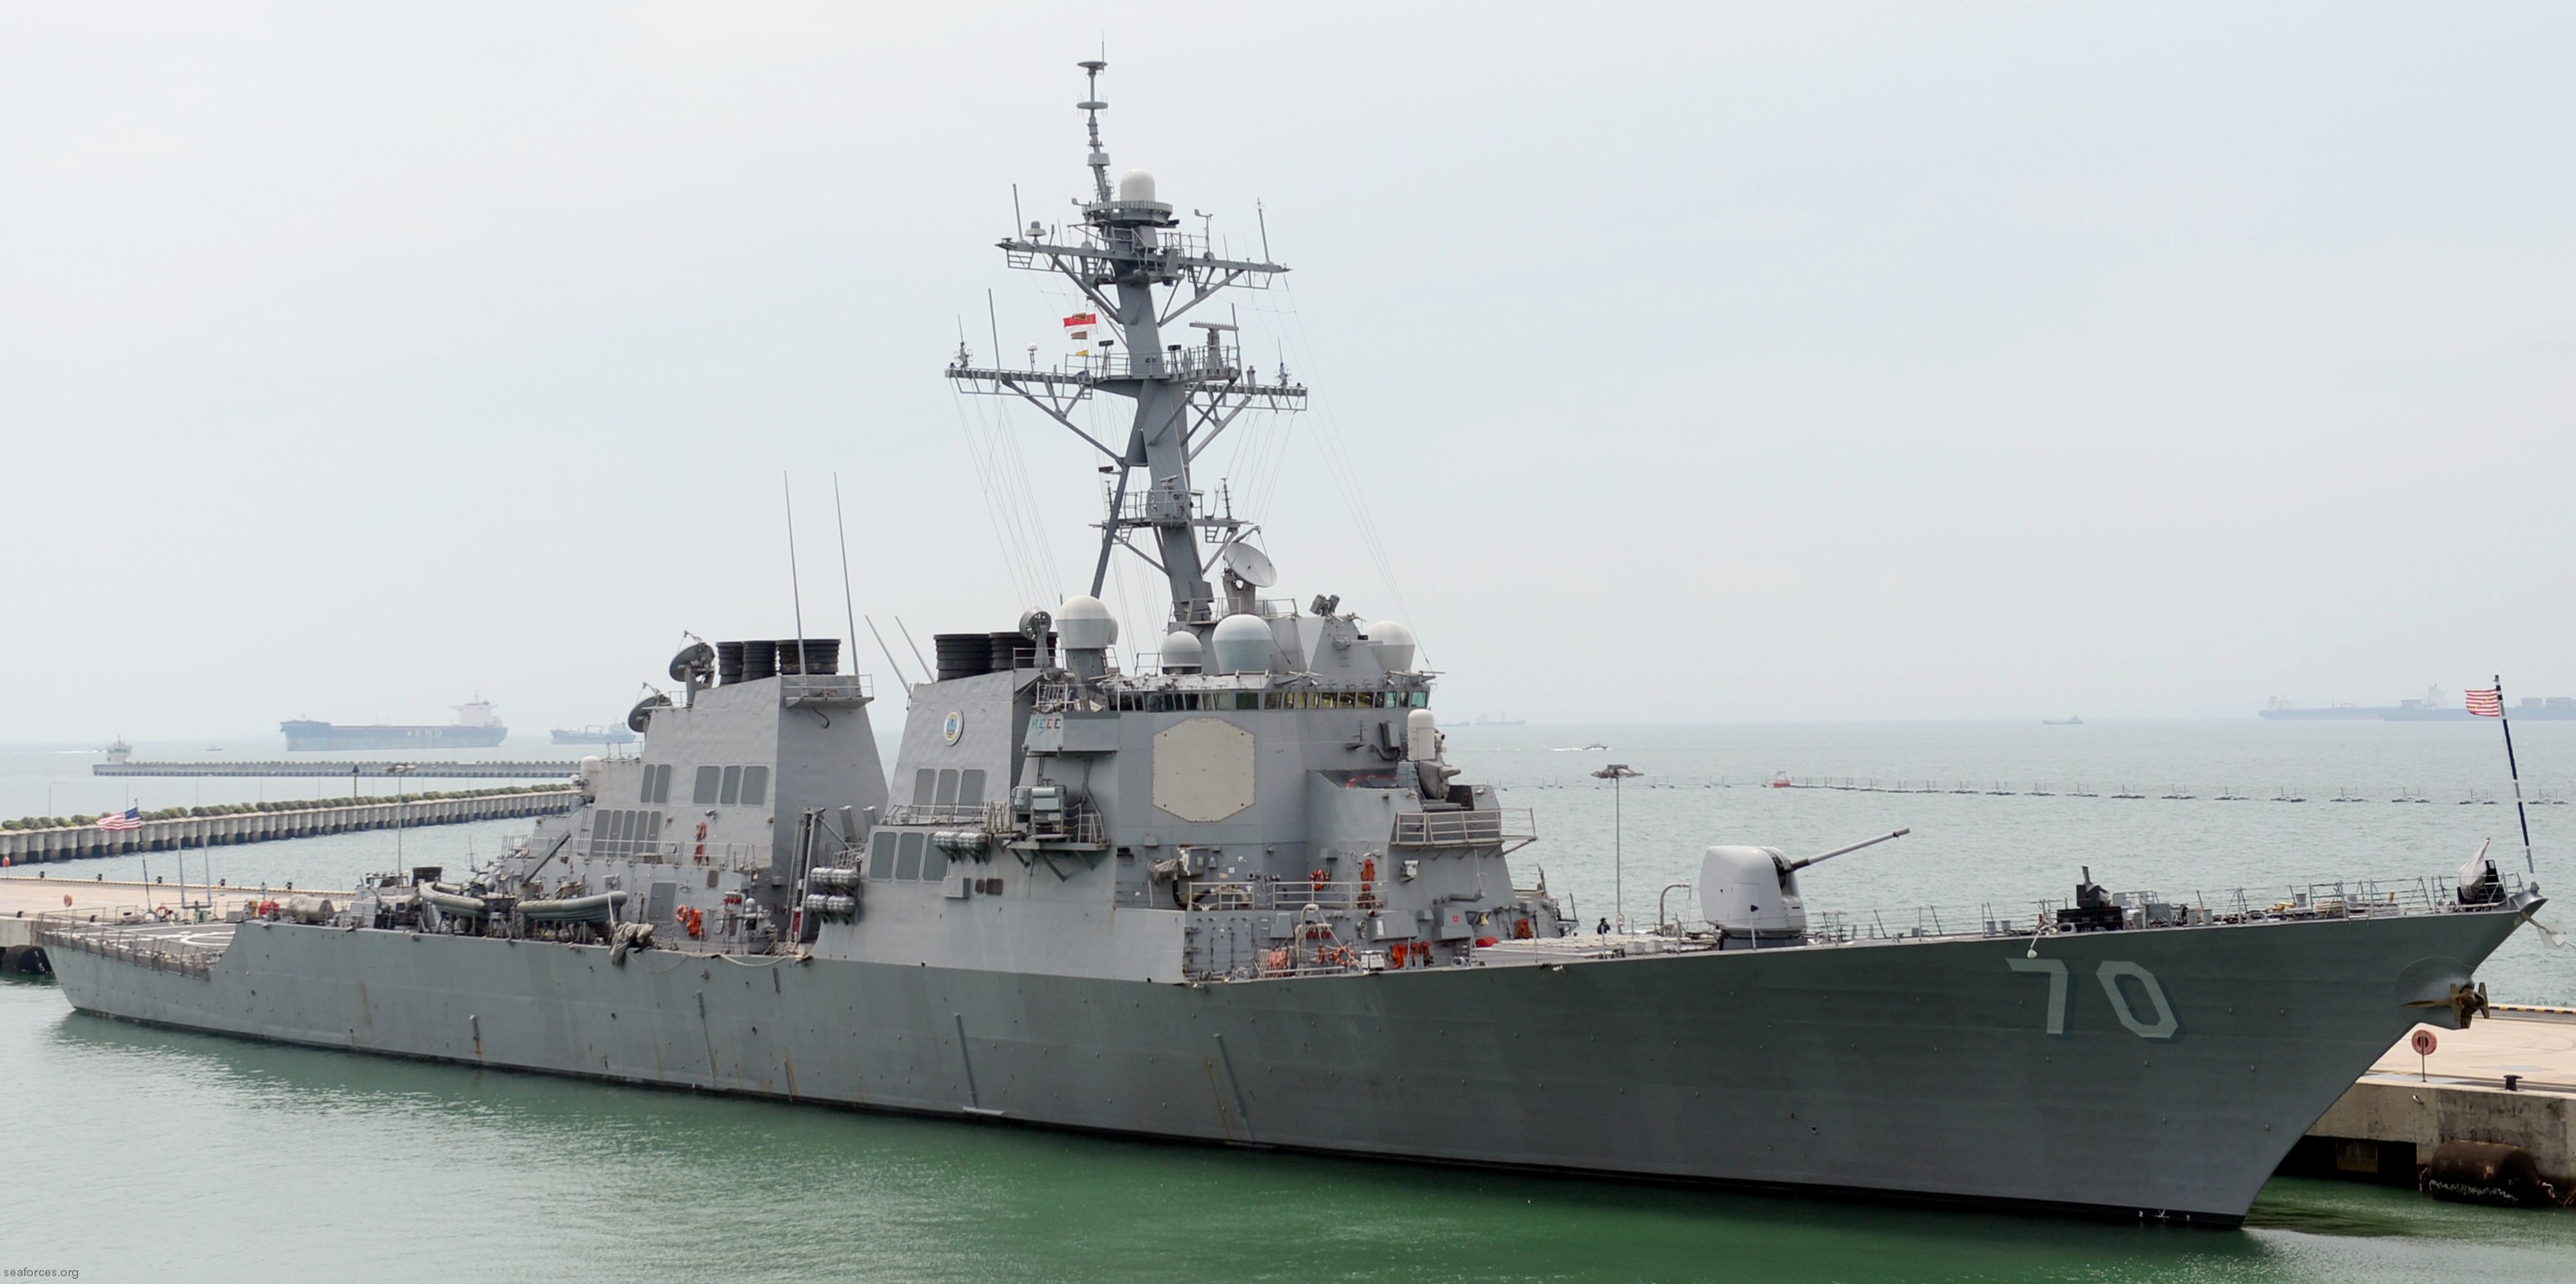 ddg-70 uss hopper guided missile destroyer arleigh burke class aegis bmd 19 changi naval base singapore